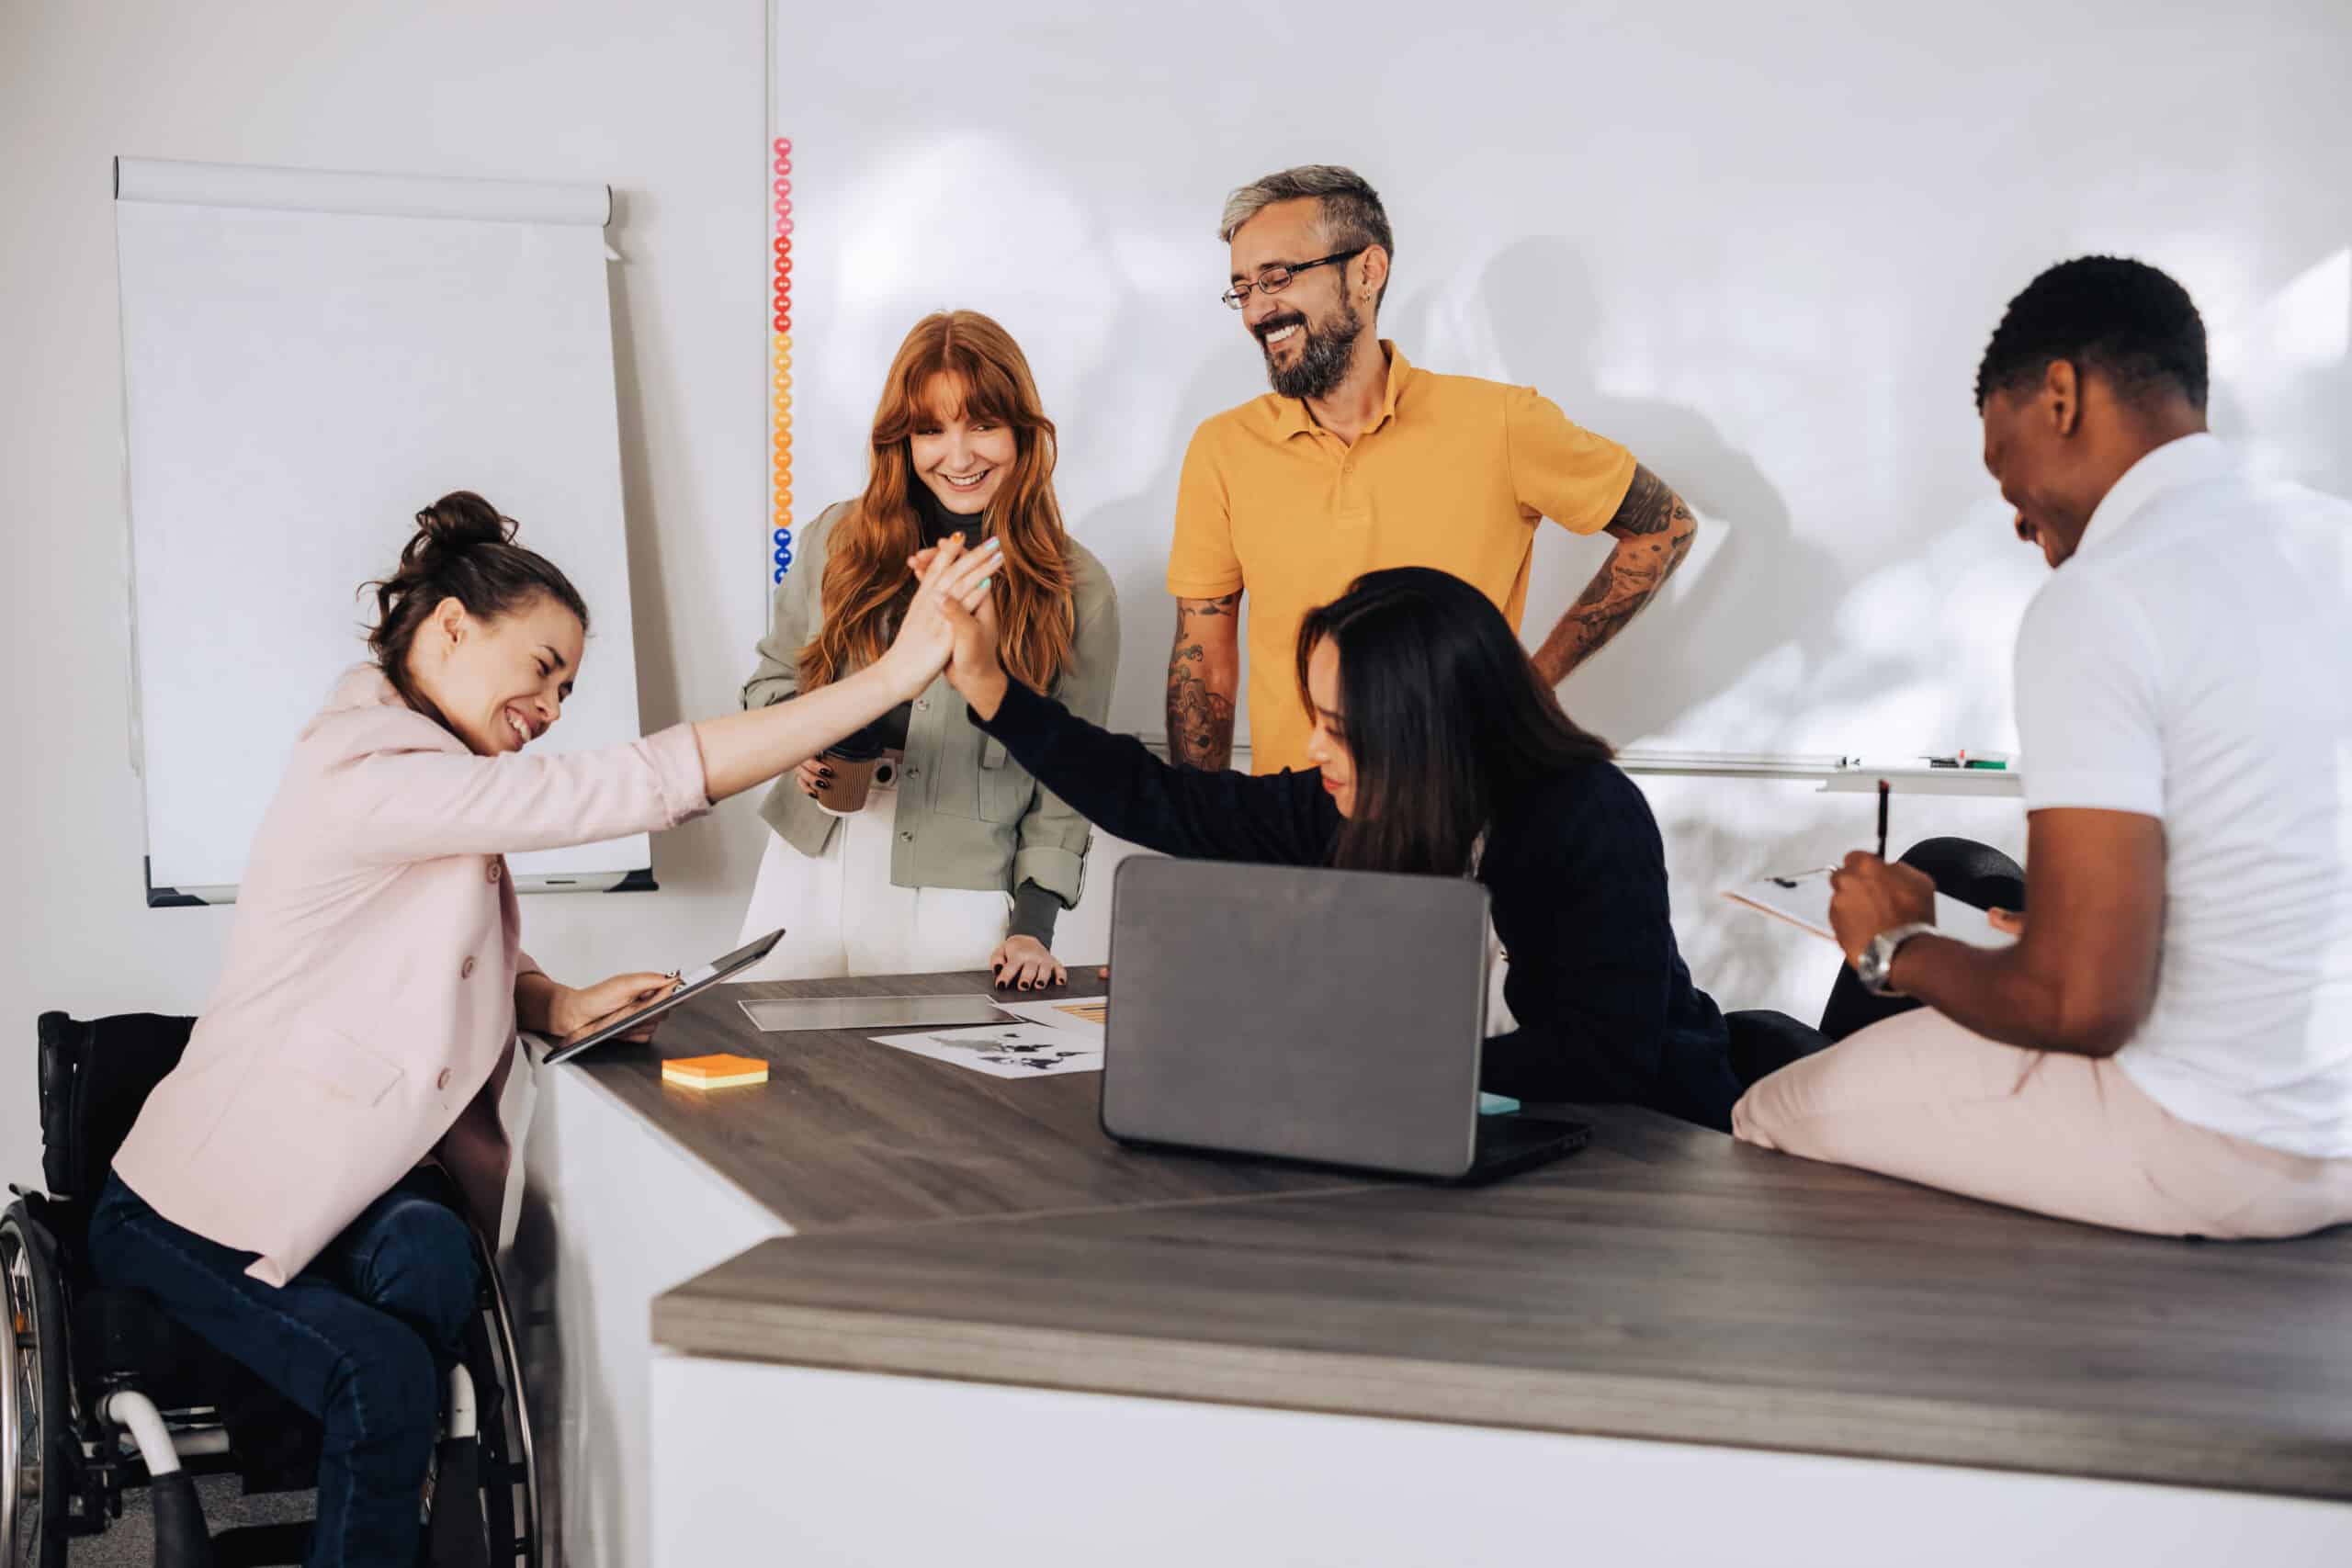 A multicultural boss is congratulating a businesswoman who uses a wheelchair success on a project while sitting with her team at office. Achievement and success on a project, teamwork and cooperation.